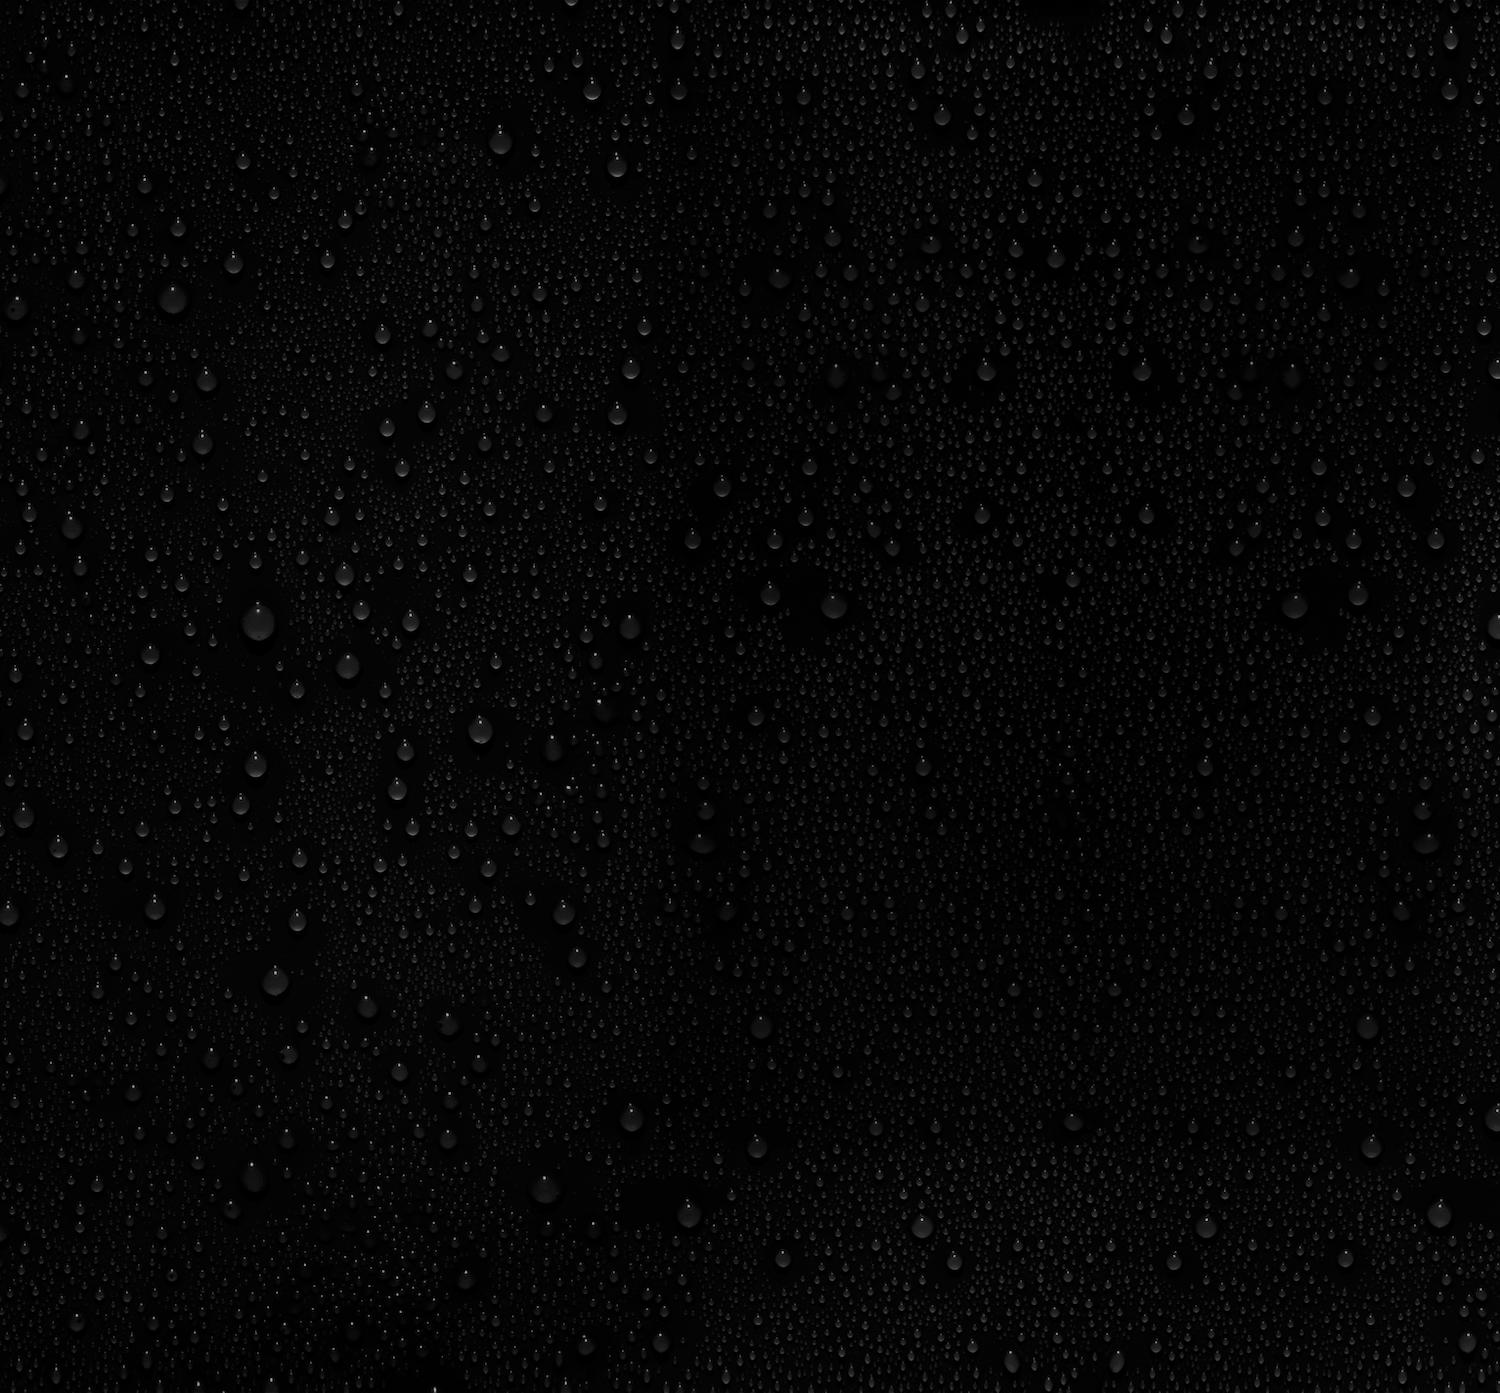 KennethPlay droplet background 